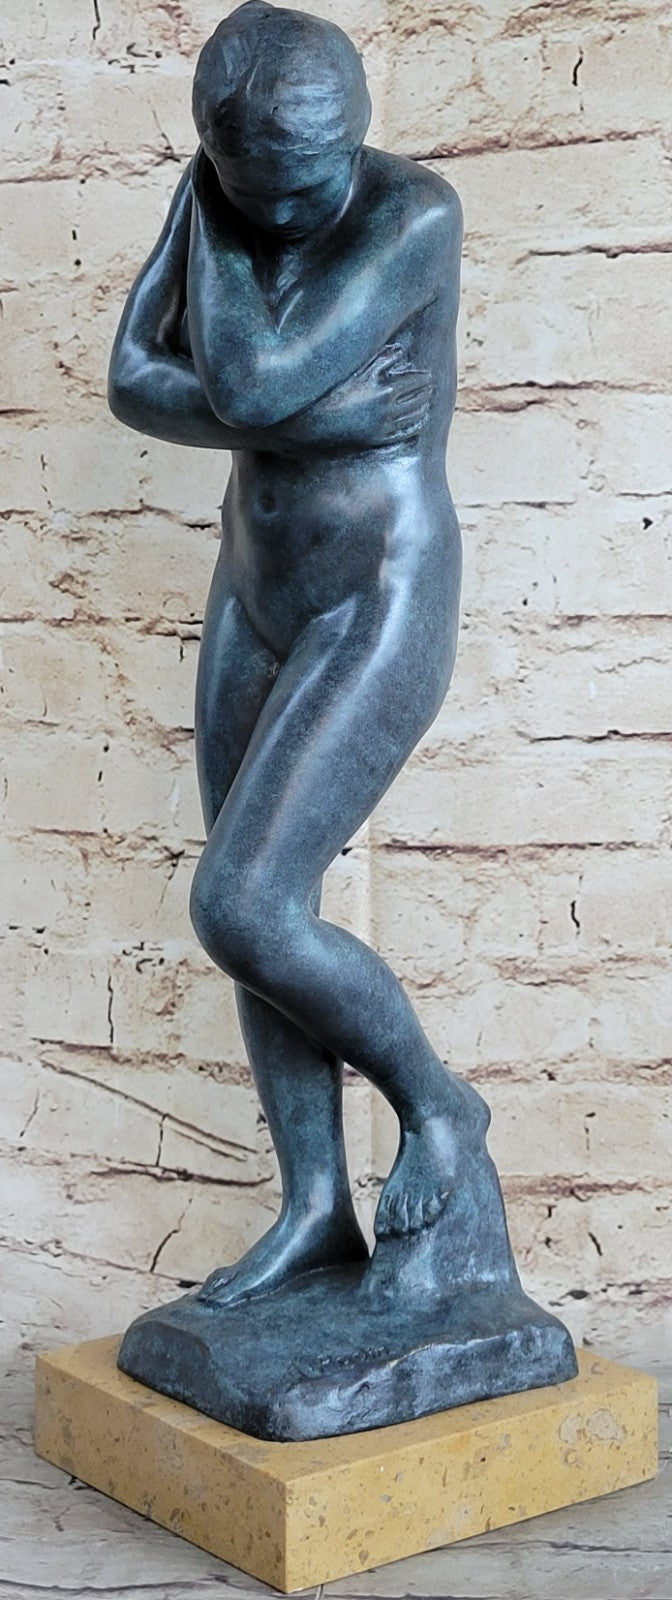 EVE by RODIN" from GATES OF HELL STATUE SCULPTURE 100% Pure BRONZE New ADAM AR